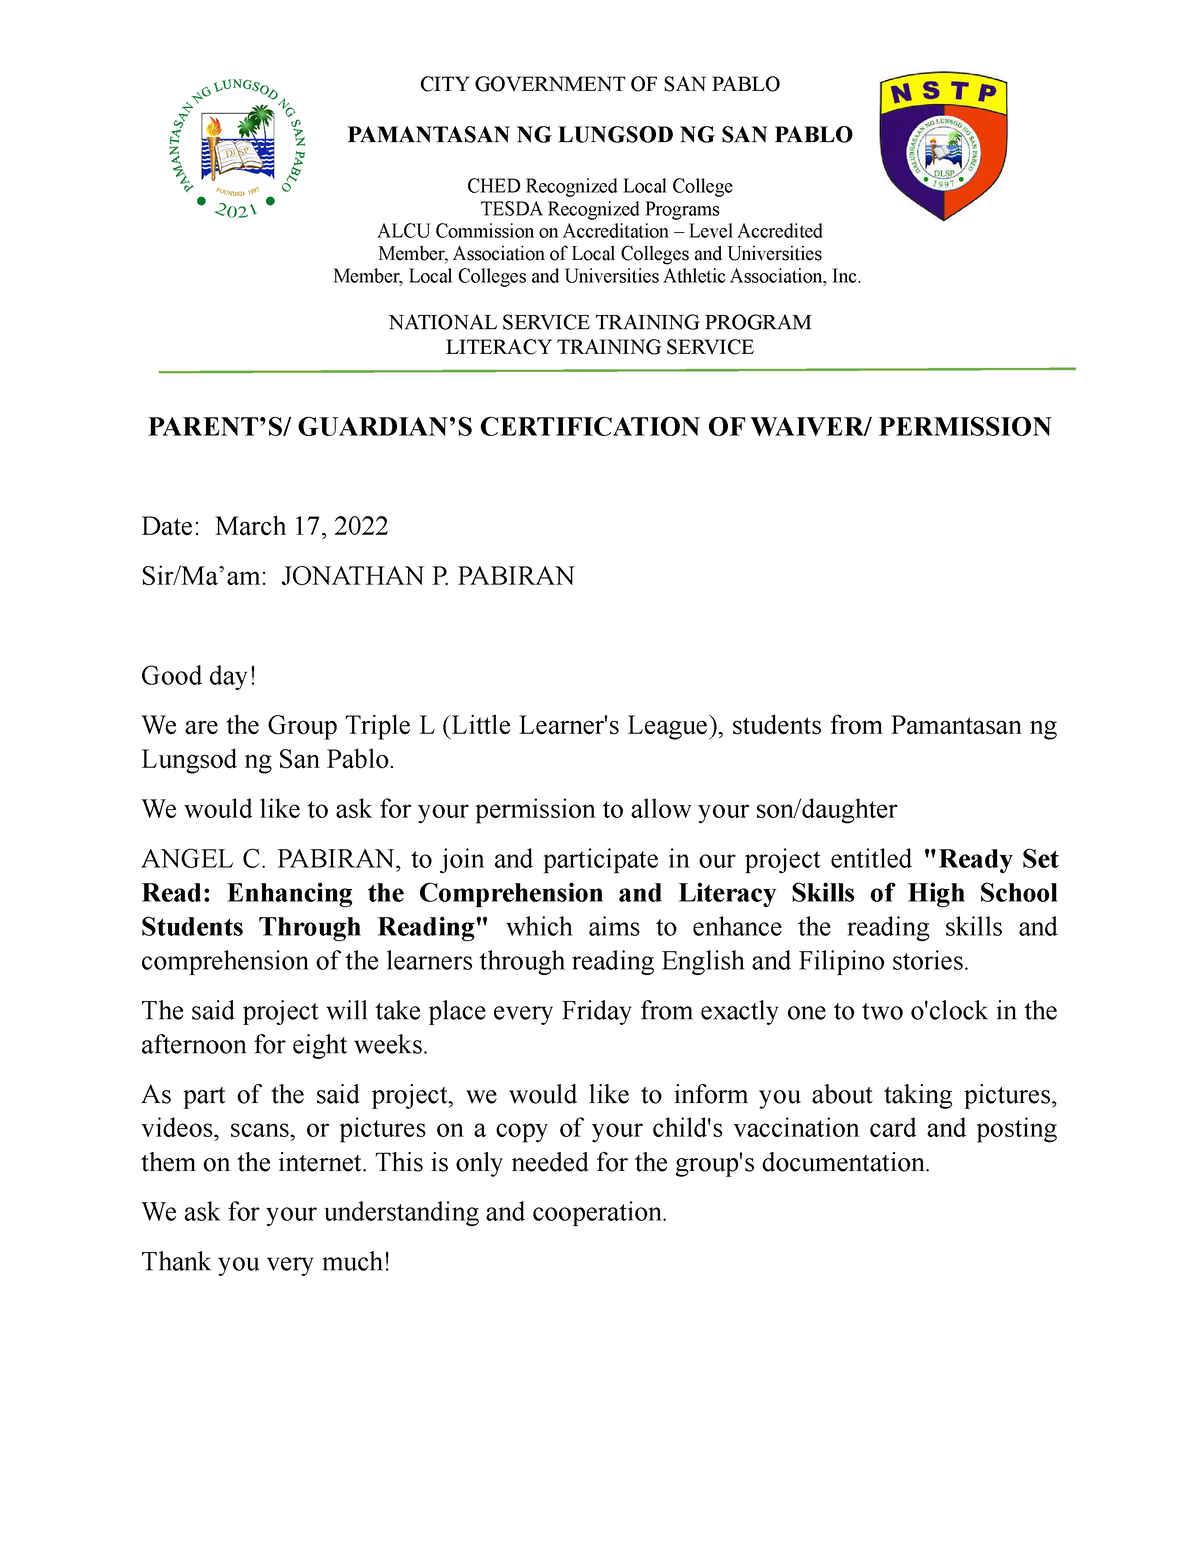 parents-guardians-certification-of-waiver-city-government-of-san-pablo-pamantasan-ng-lungsod